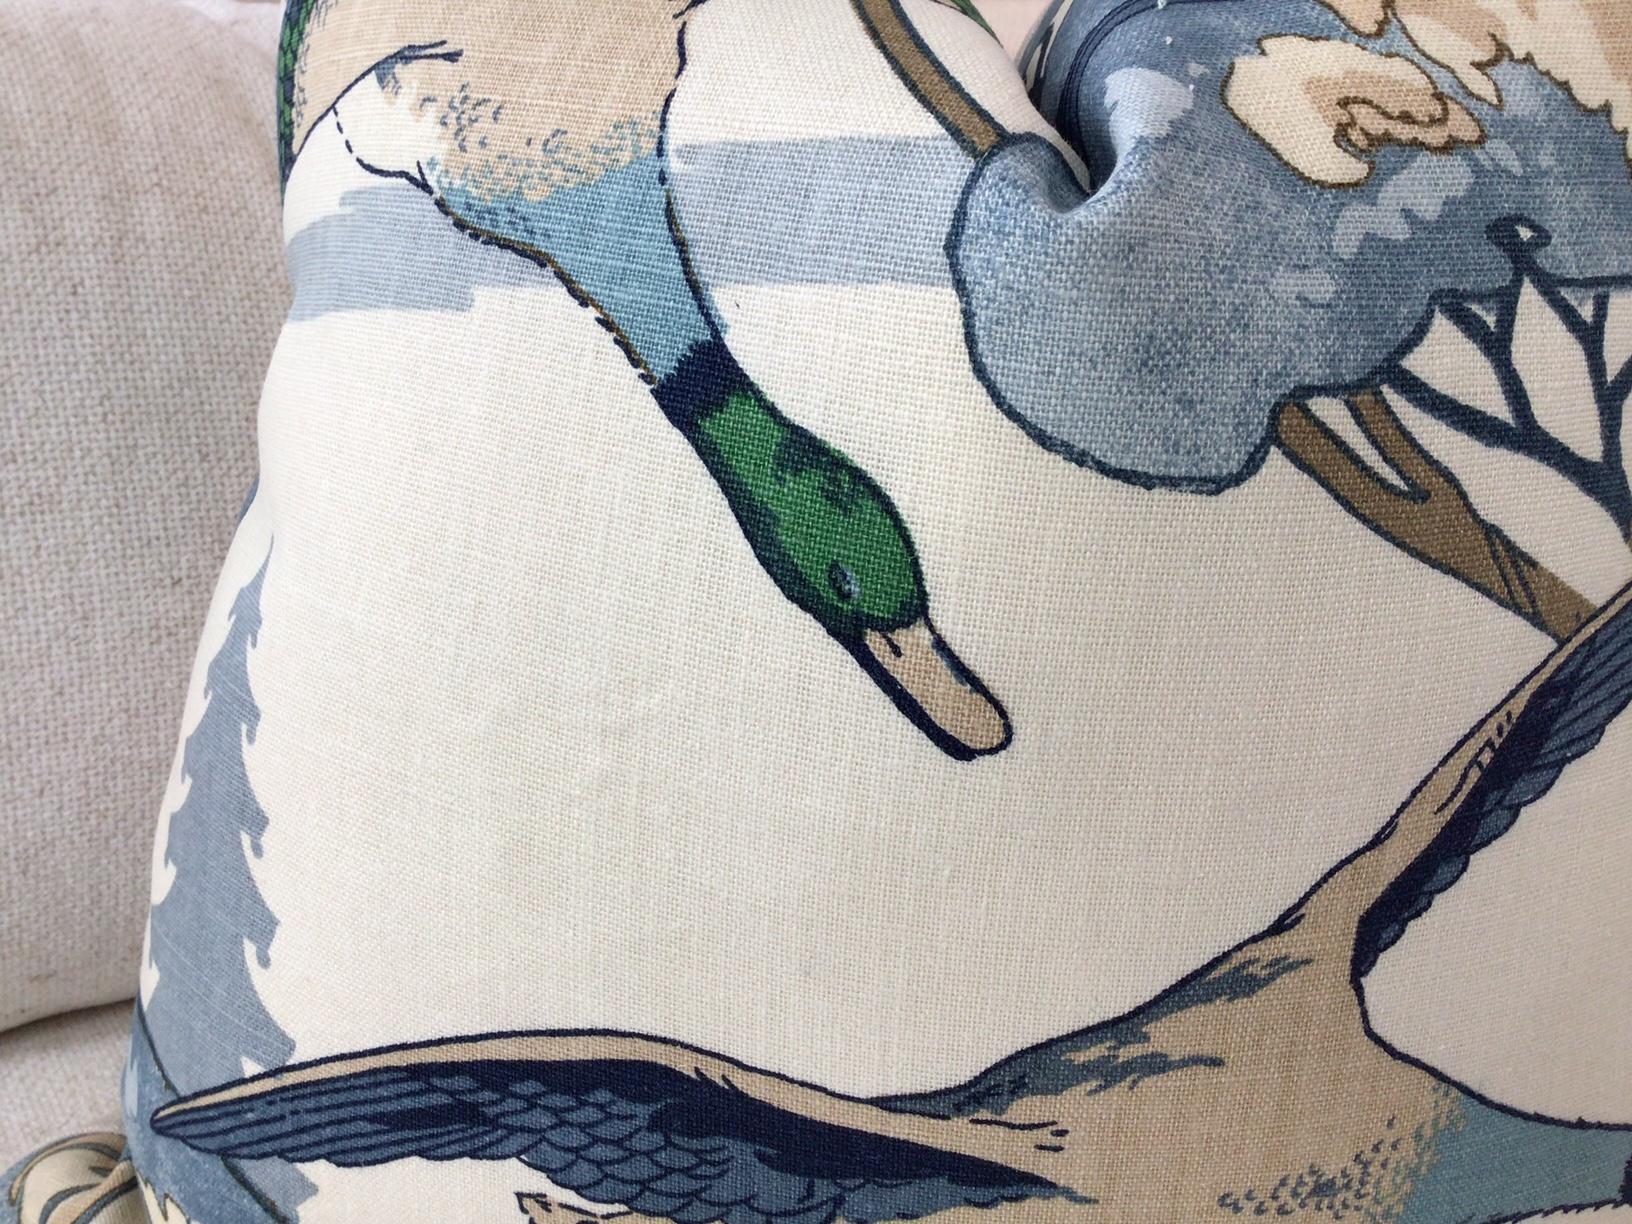 BEAUTIFUL and reminiscent of an English country Manor home, Lee Jofa's “Flying Ducks” is a lovely pattern from Mulberry and features ducks in flight in rich colors of light and dark blue, brilliant Kelly green, a soft and deep tan. This exquisite